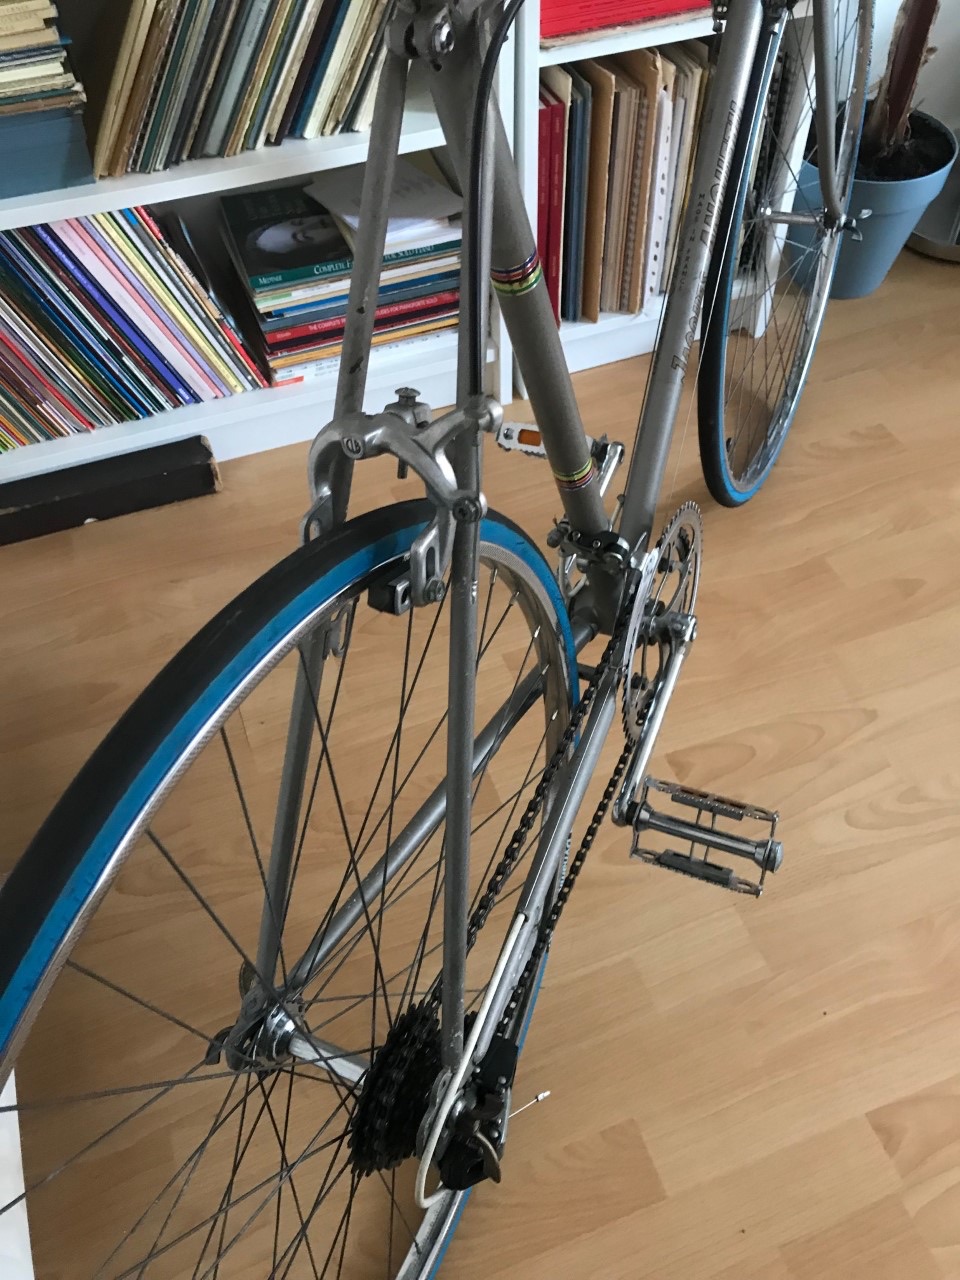 Rear image of Anquetil bike